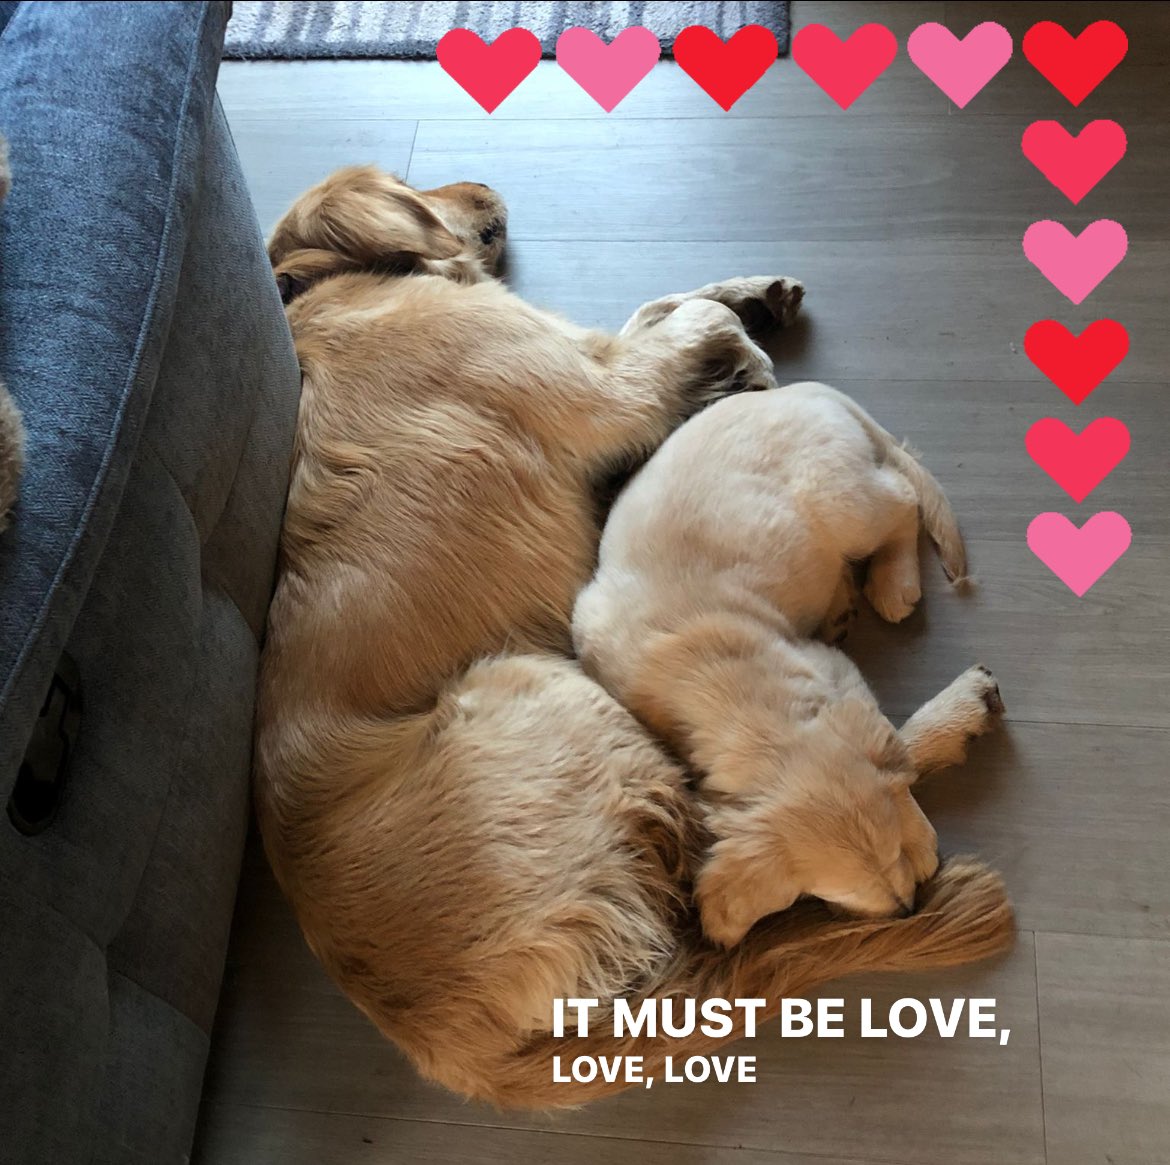 #Friday’s child is loving and giving … 
@guidedogs 
#lifechangers #mustbelove #lovedogs